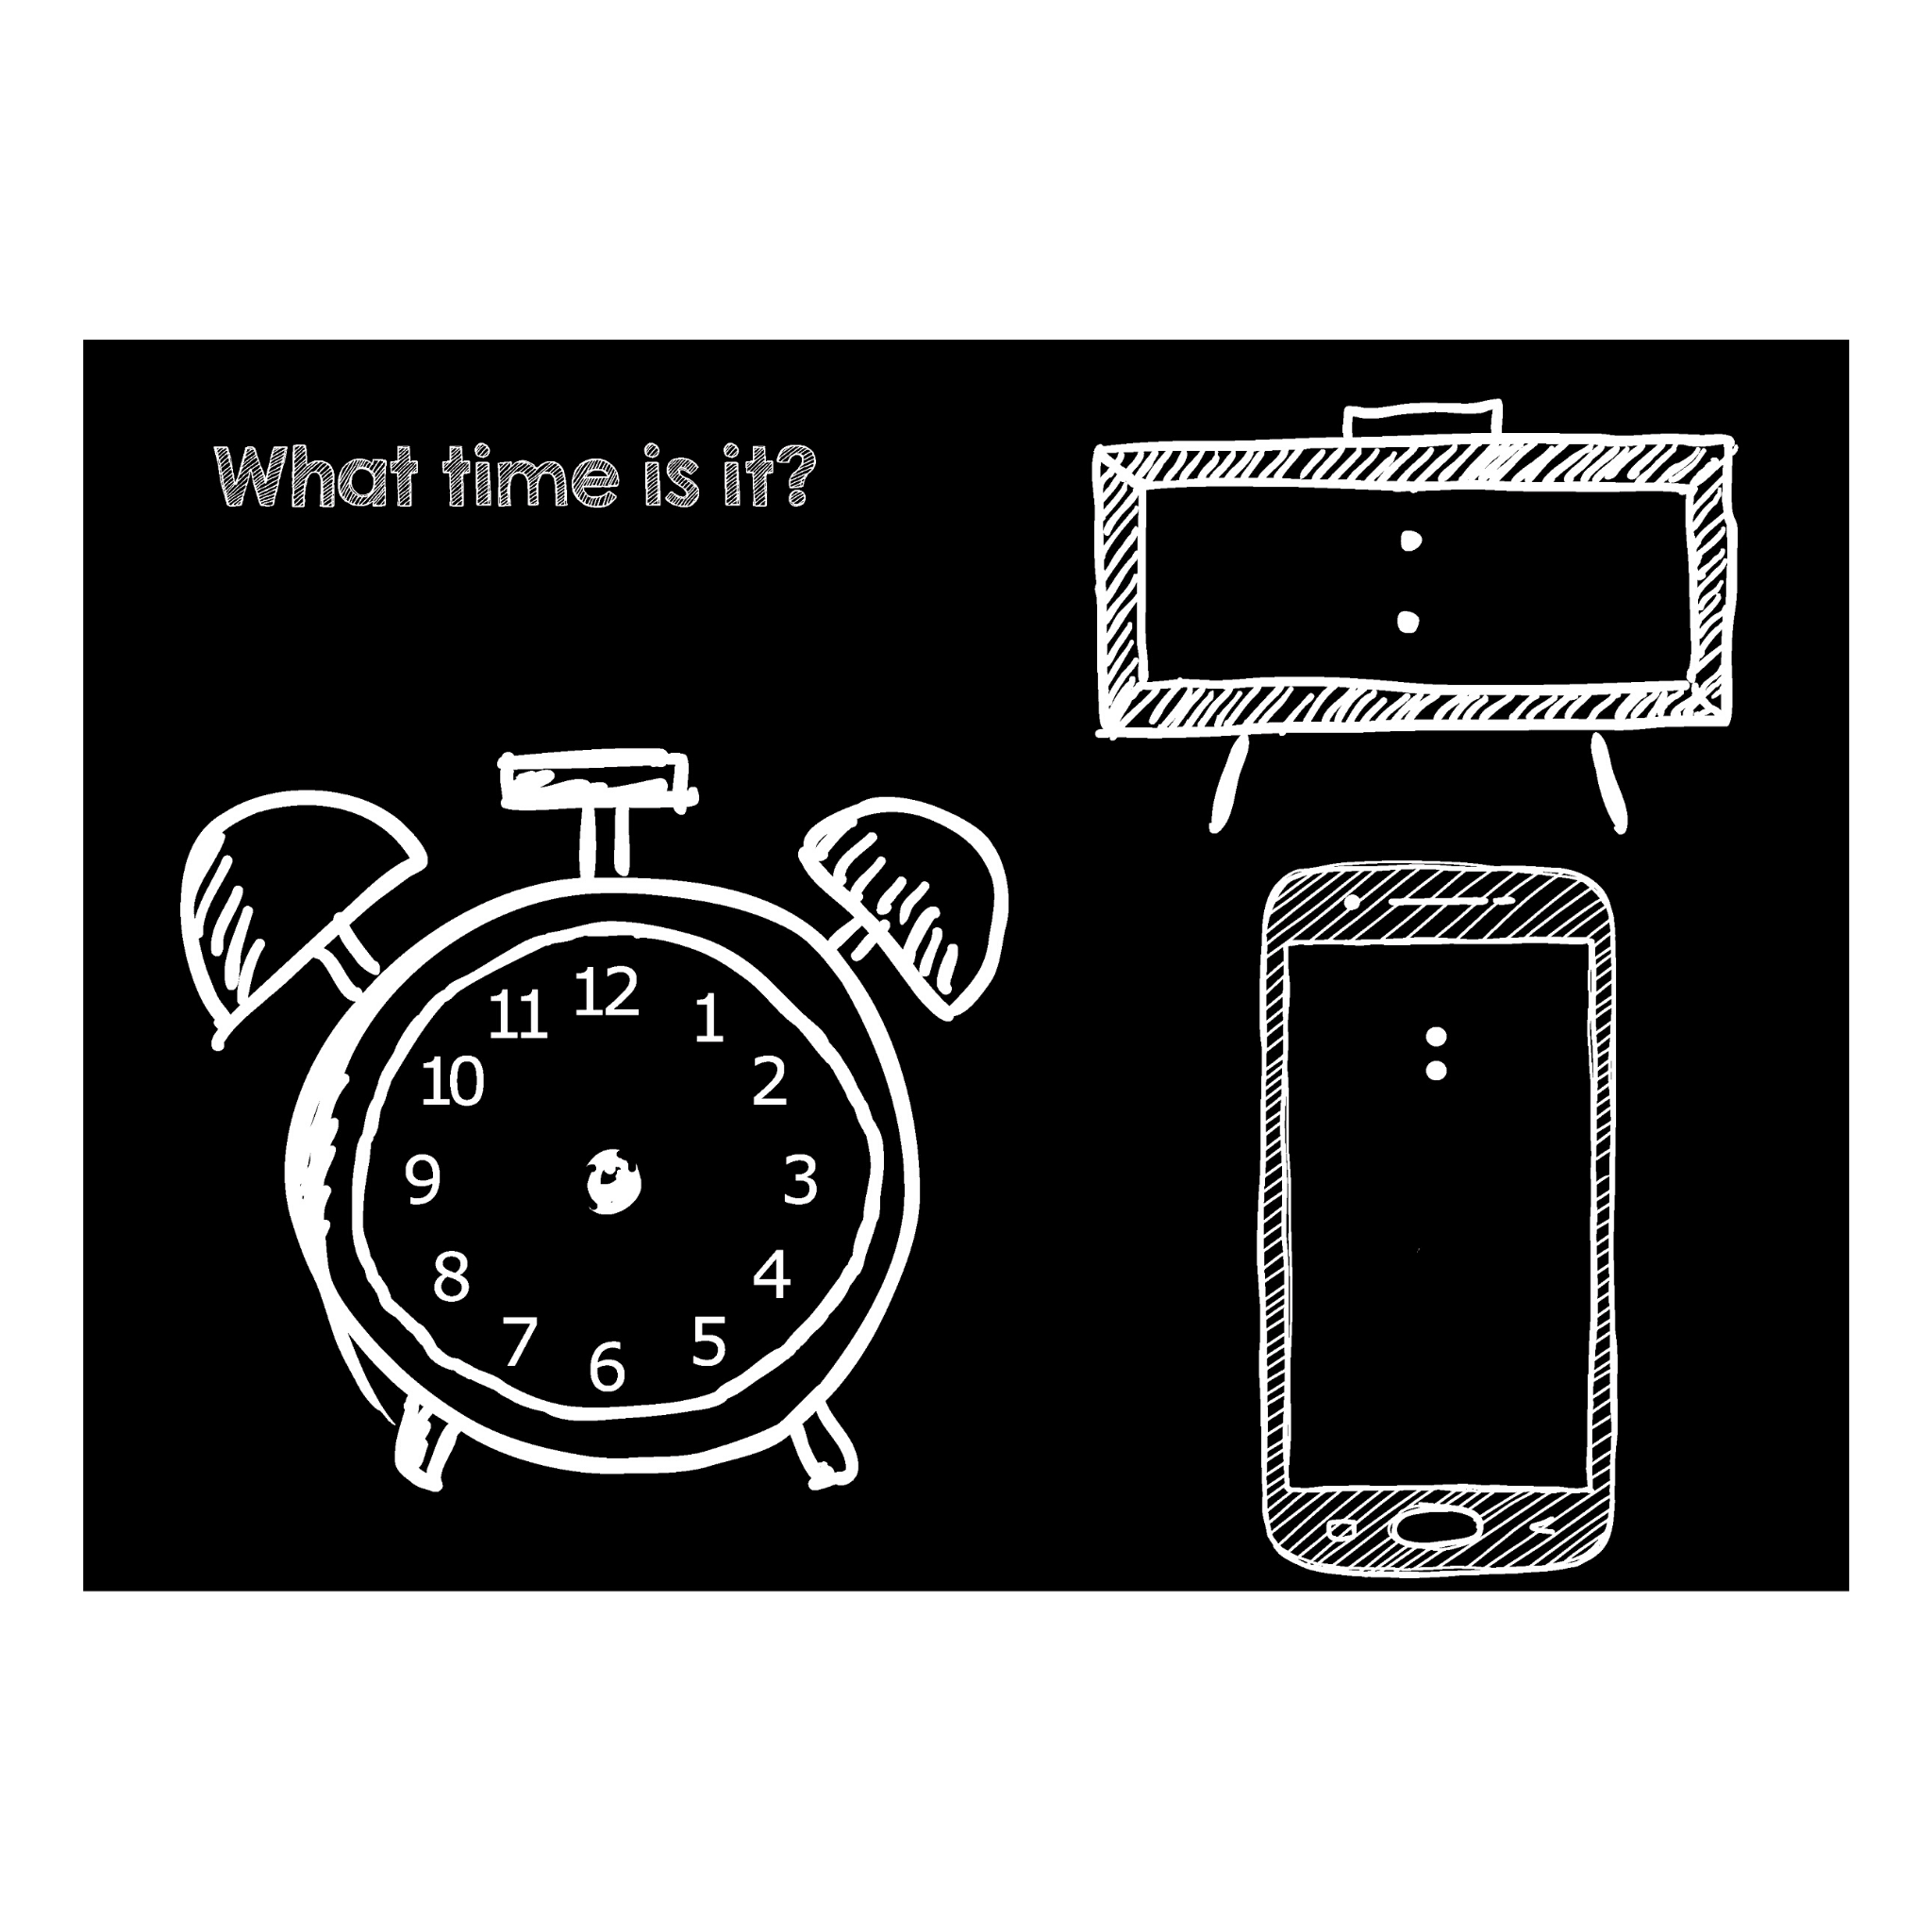 Chalkboard Placemat 12x17 "What time is it?"